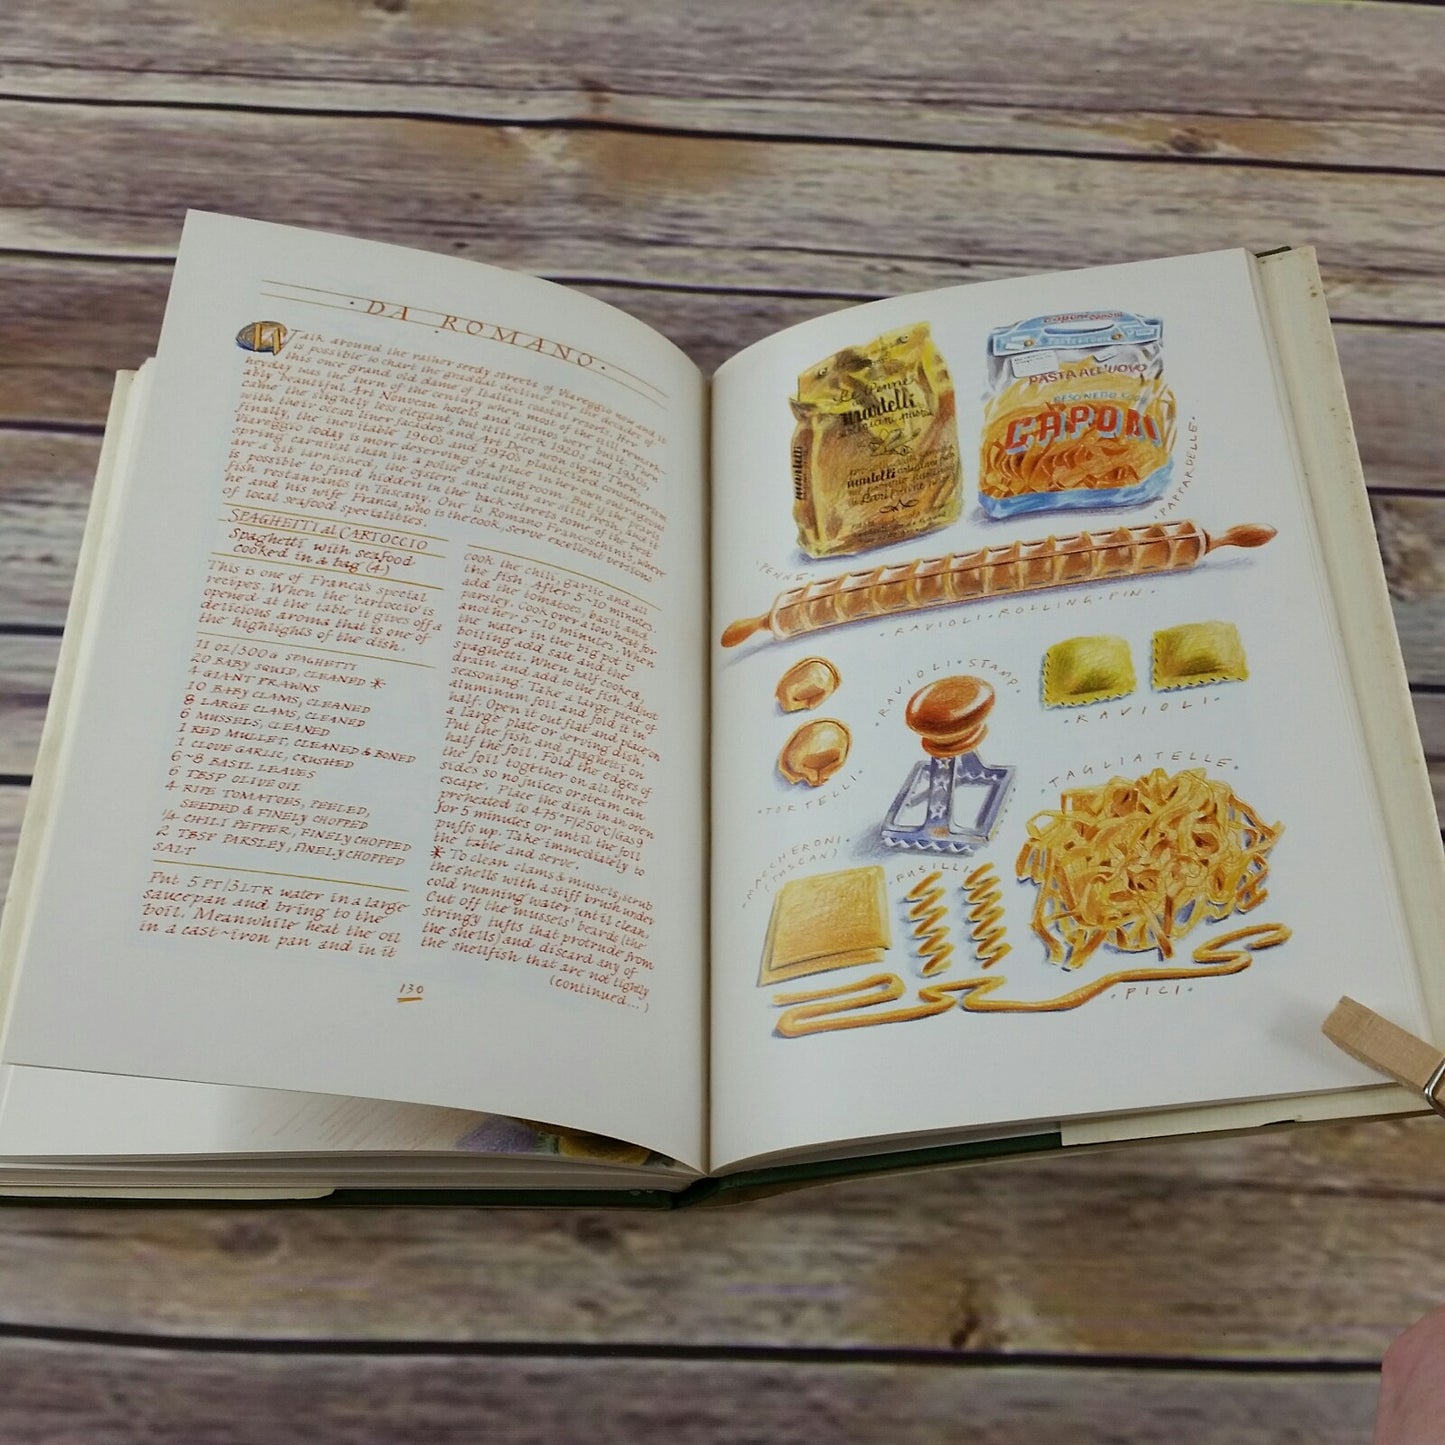 Vintage Italian Cooking Cookbook A Taste of Tuscany Leslie Forbes 1985 Hardcover Recipes - At Grandma's Table